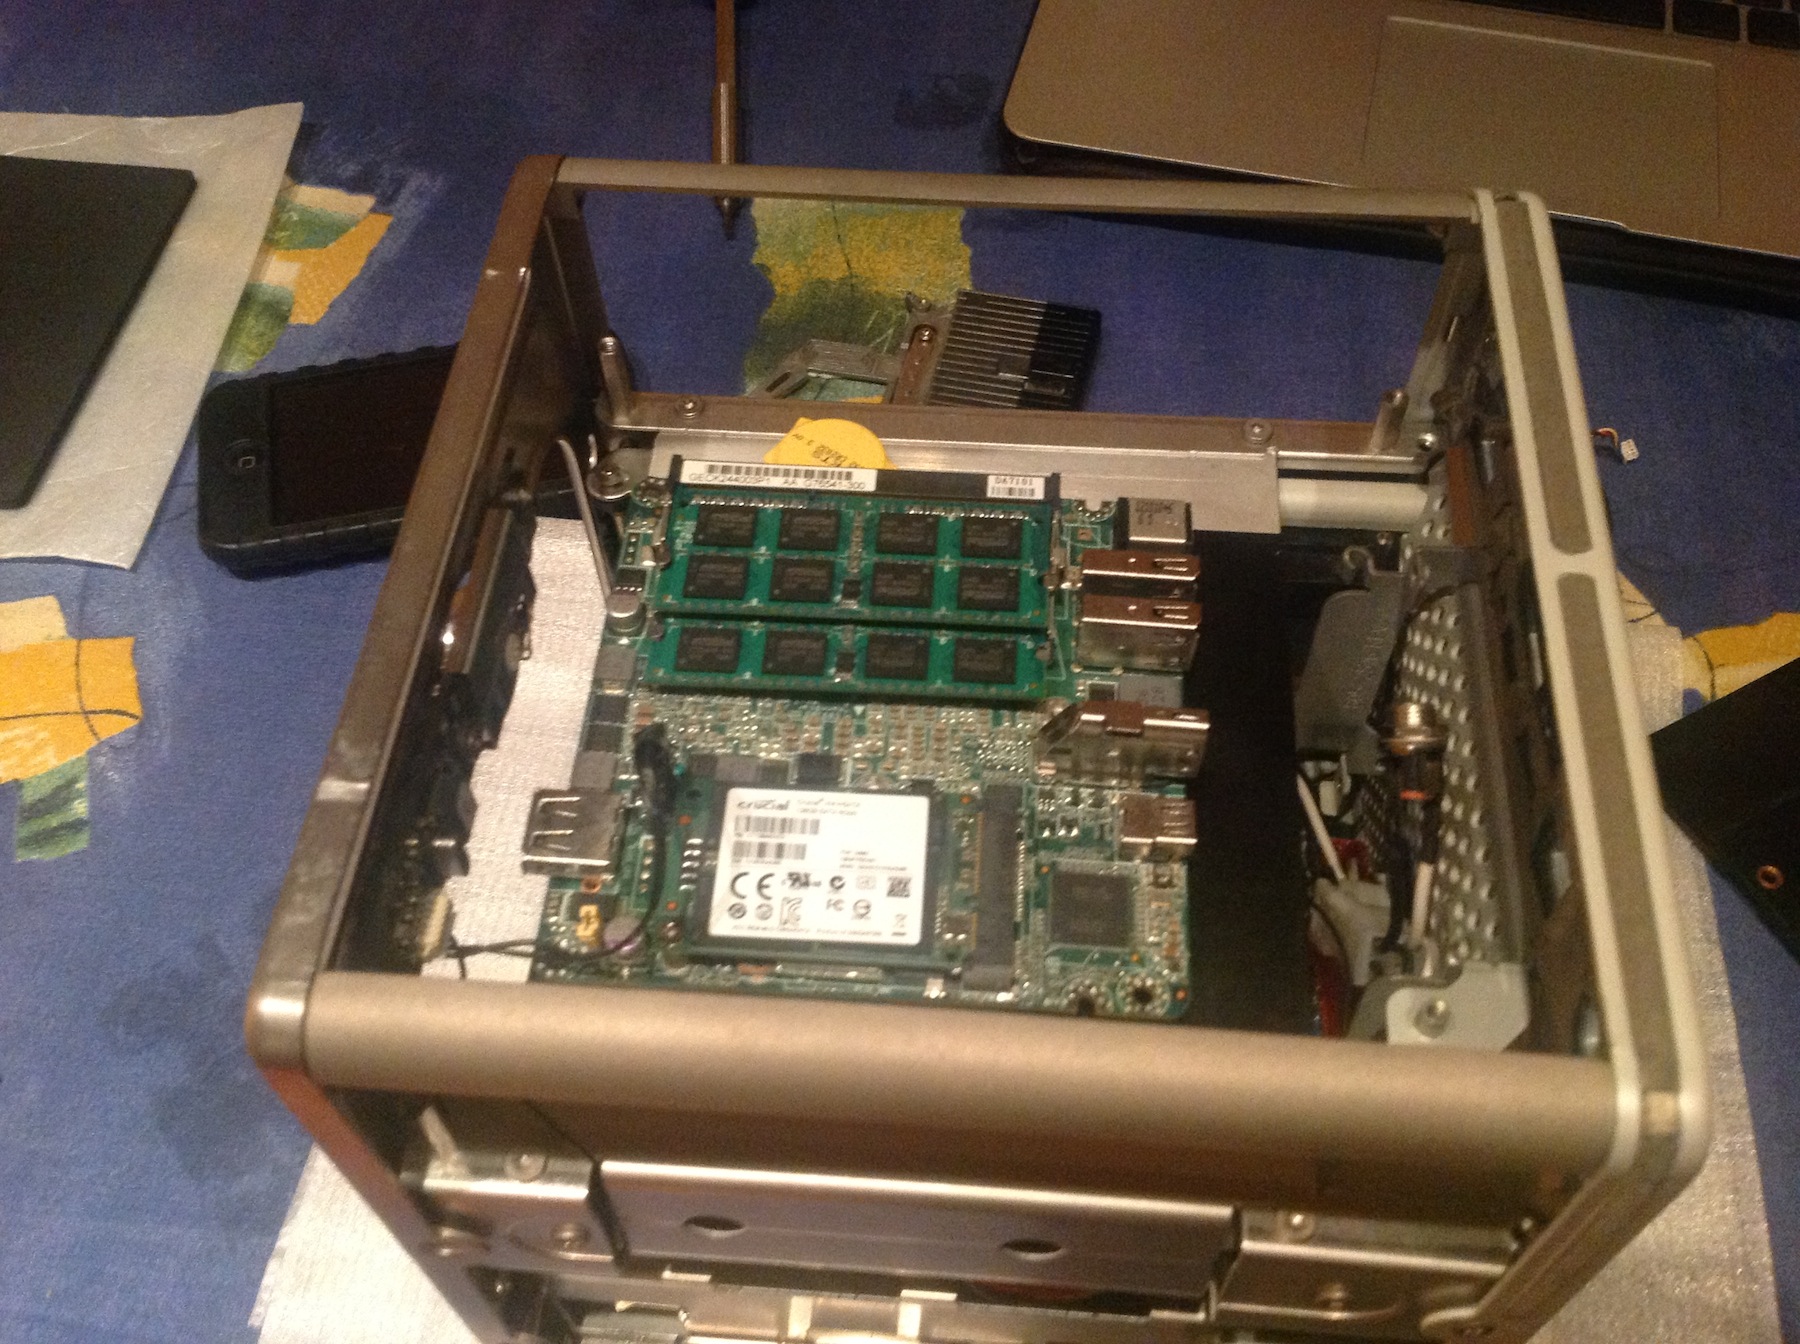 Mobo in place with heat spreader (3)